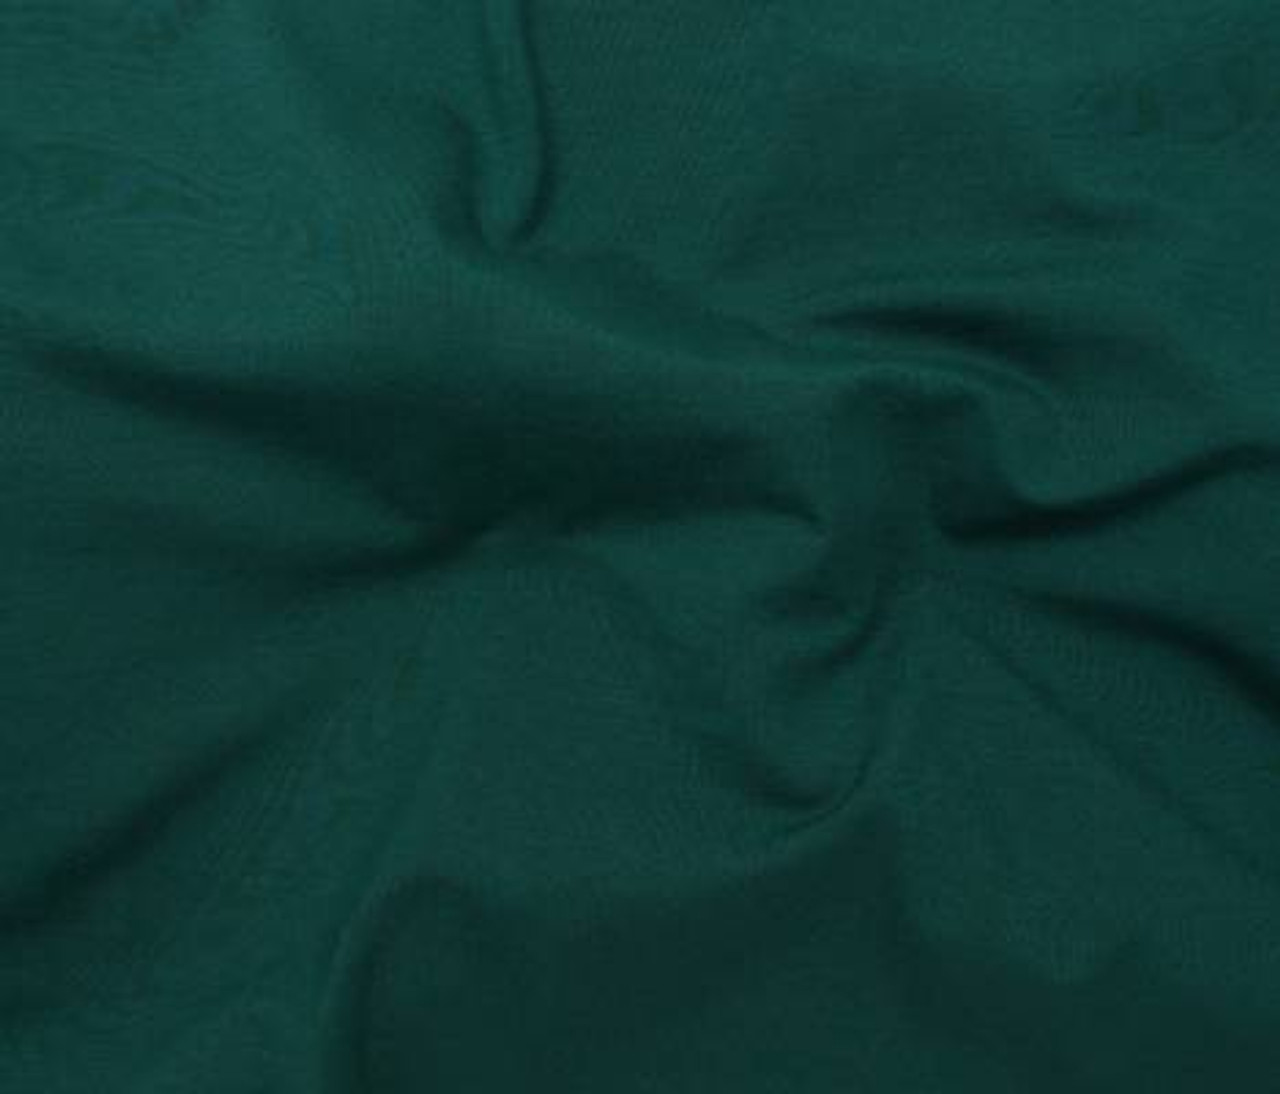 DARK GREEN SOFTIQUE RAYON VISCOSE KNIT FABRIC - SOLD BY THE 1/2